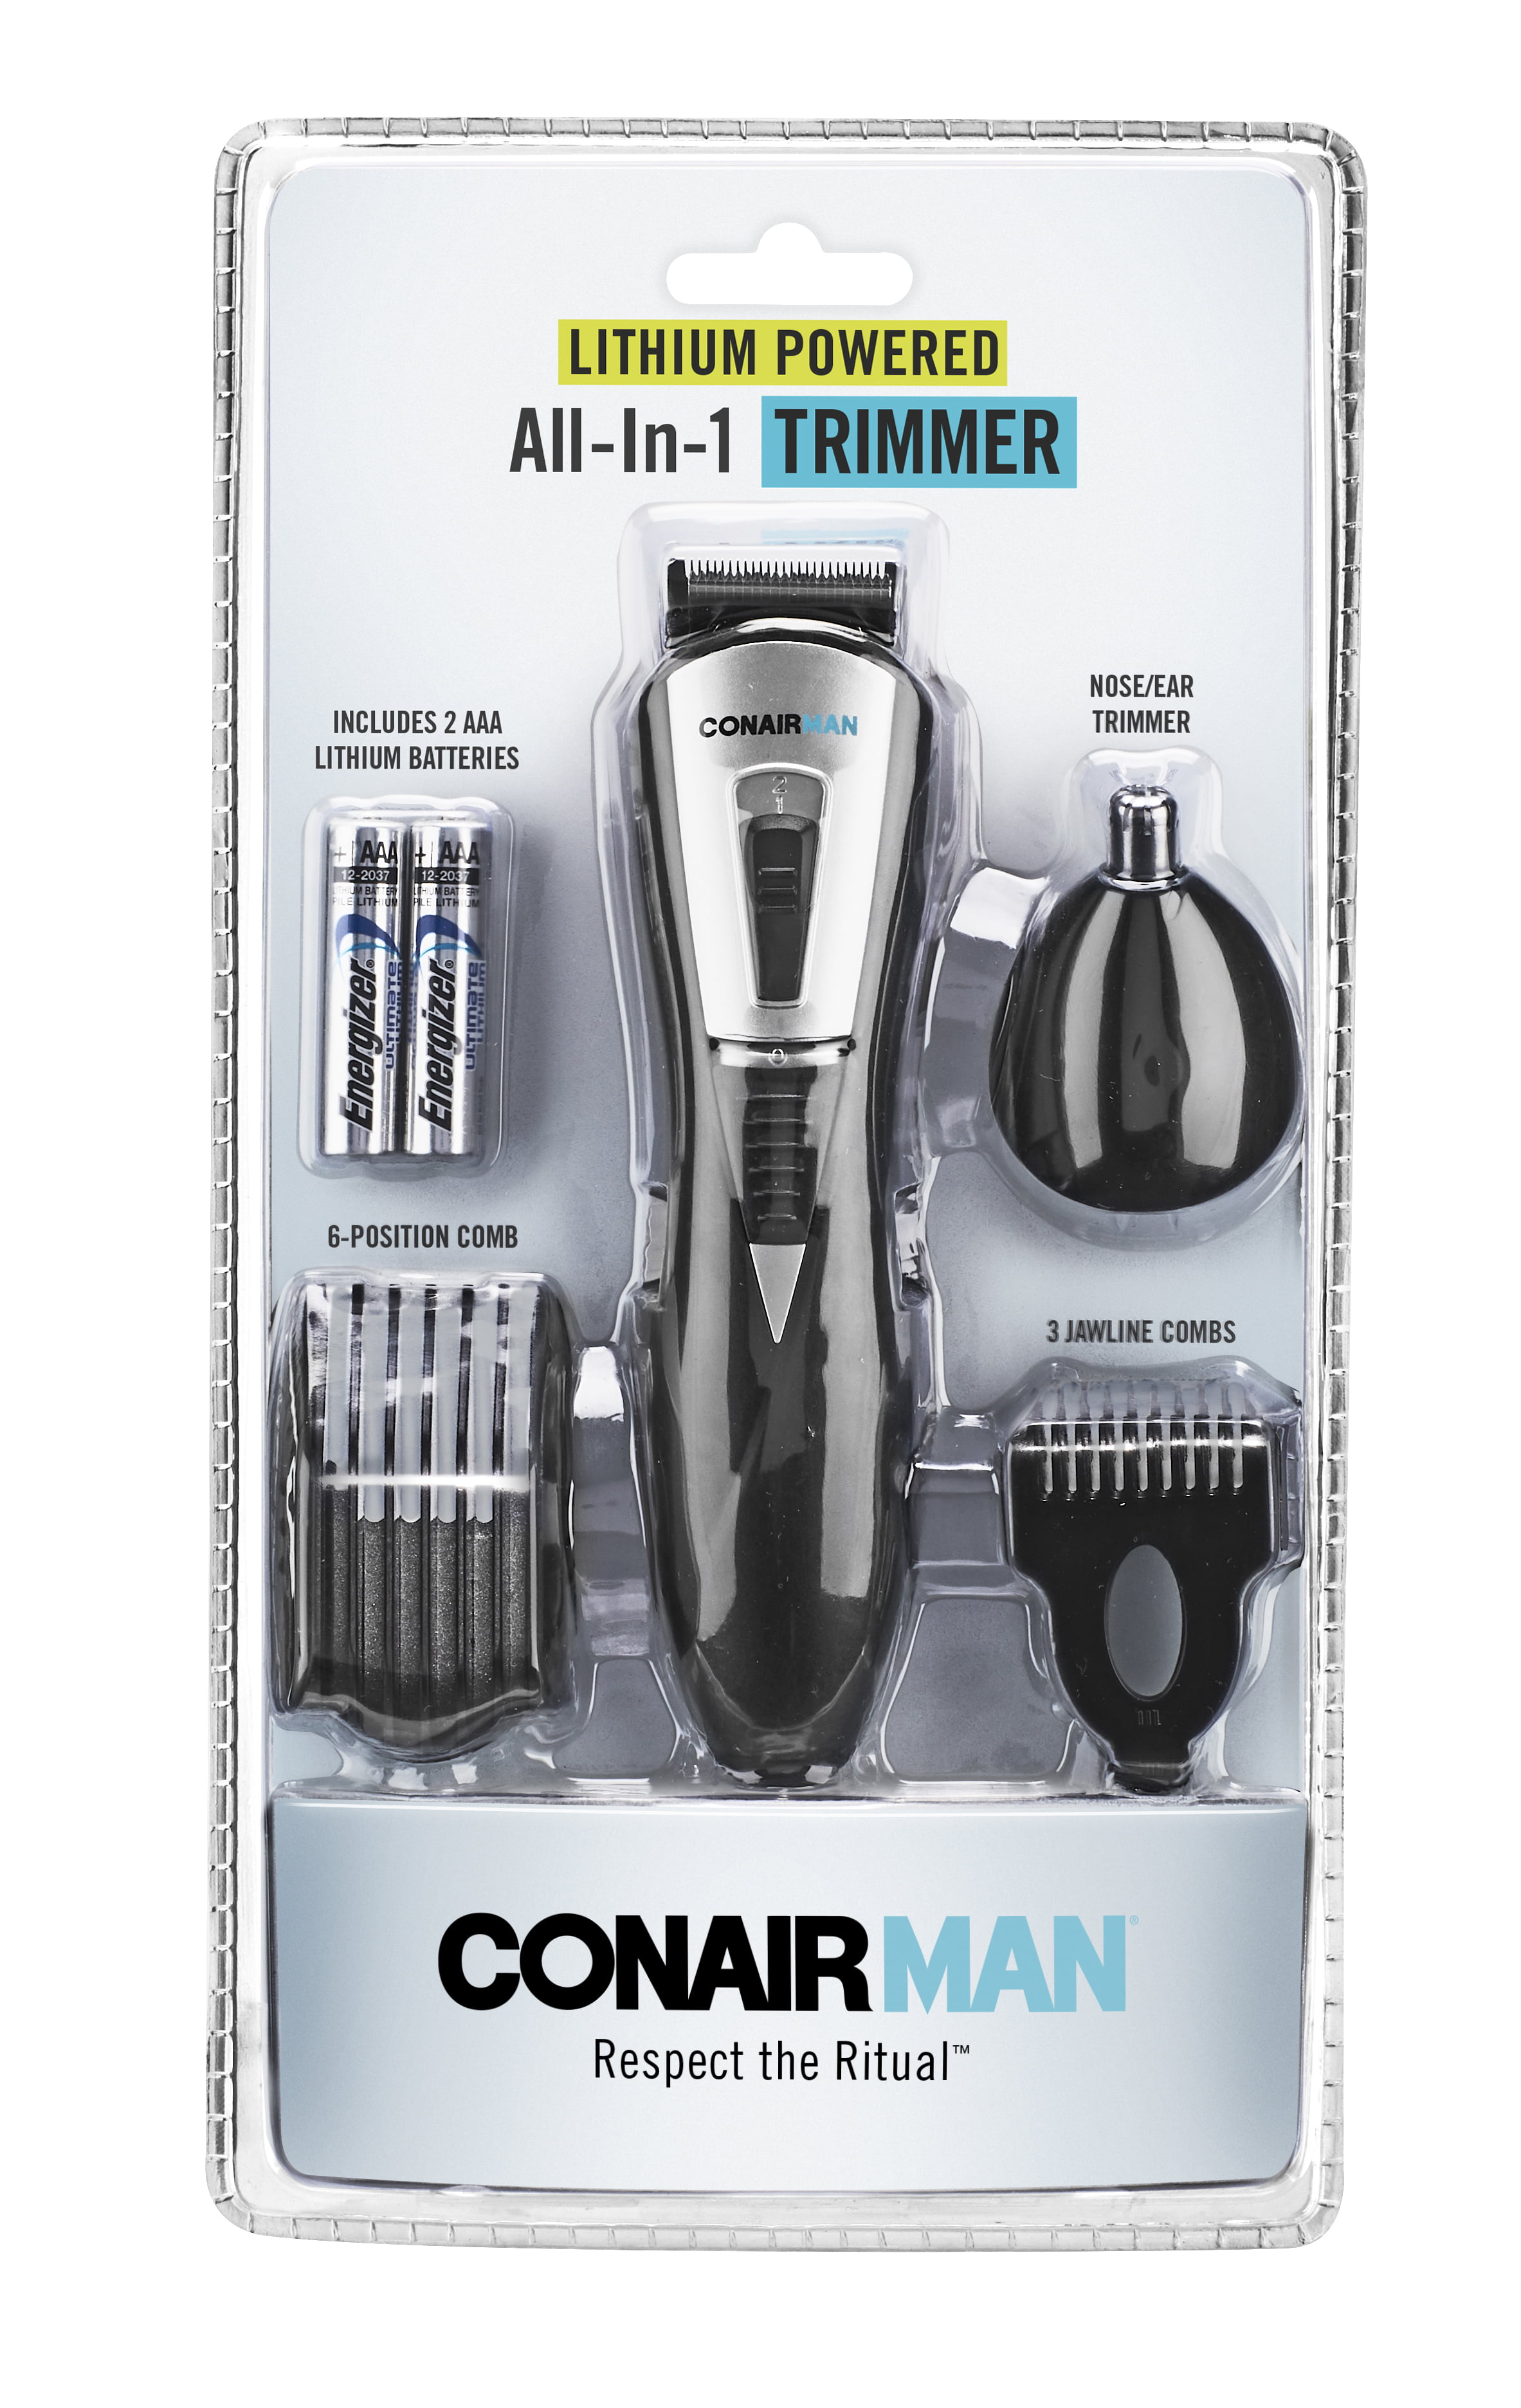 conairman all in one trimmer